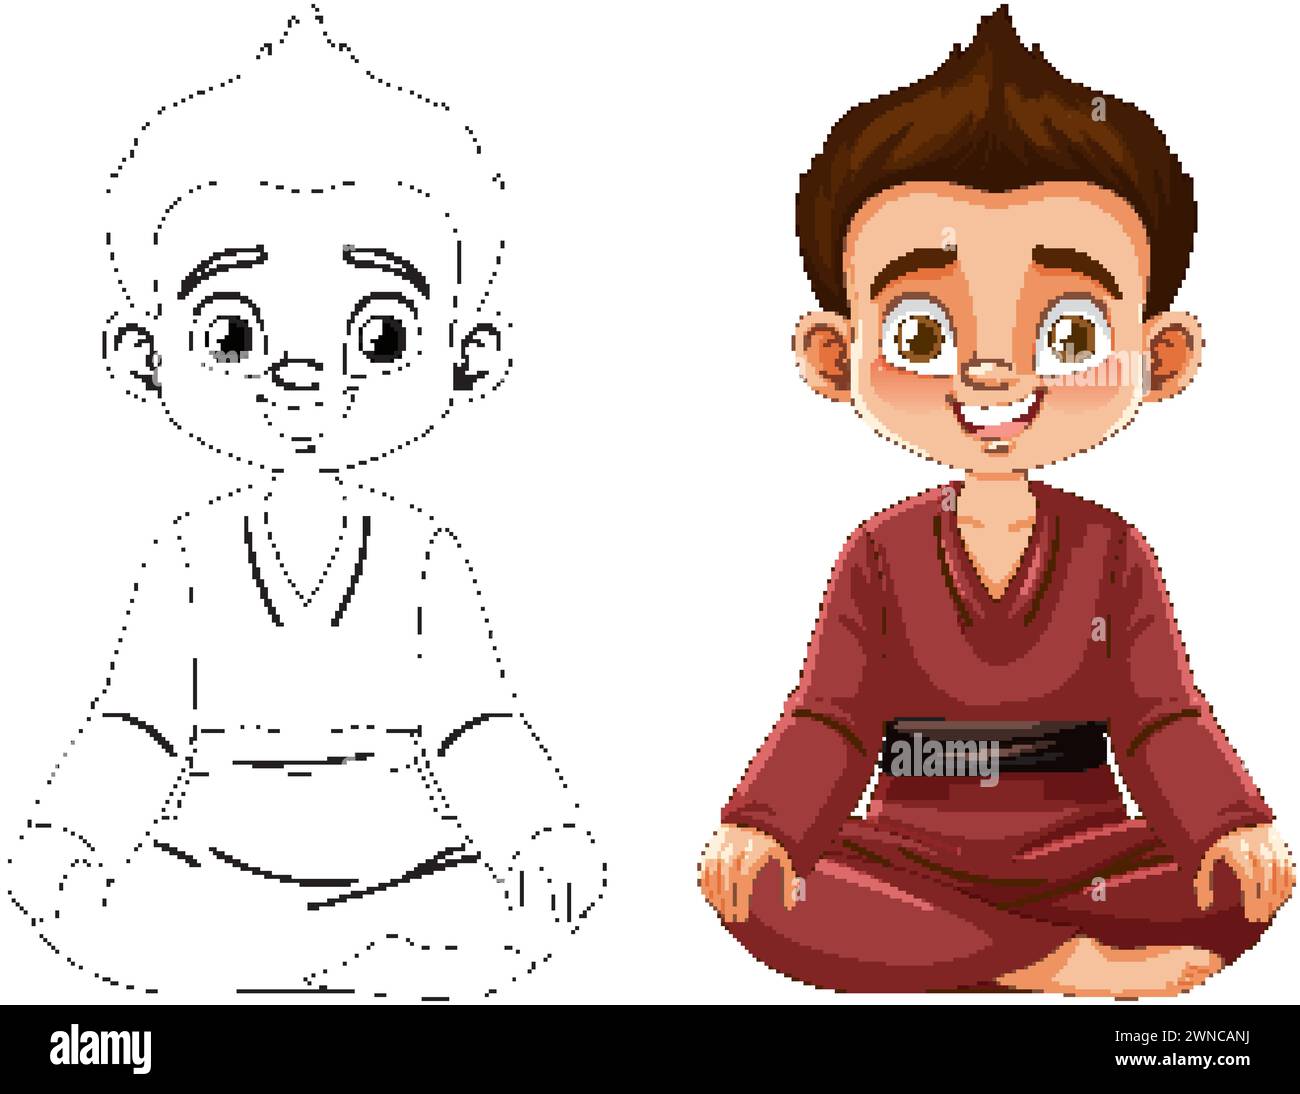 Illustration of a boy in karate attire, colored and sketched. Stock Vector